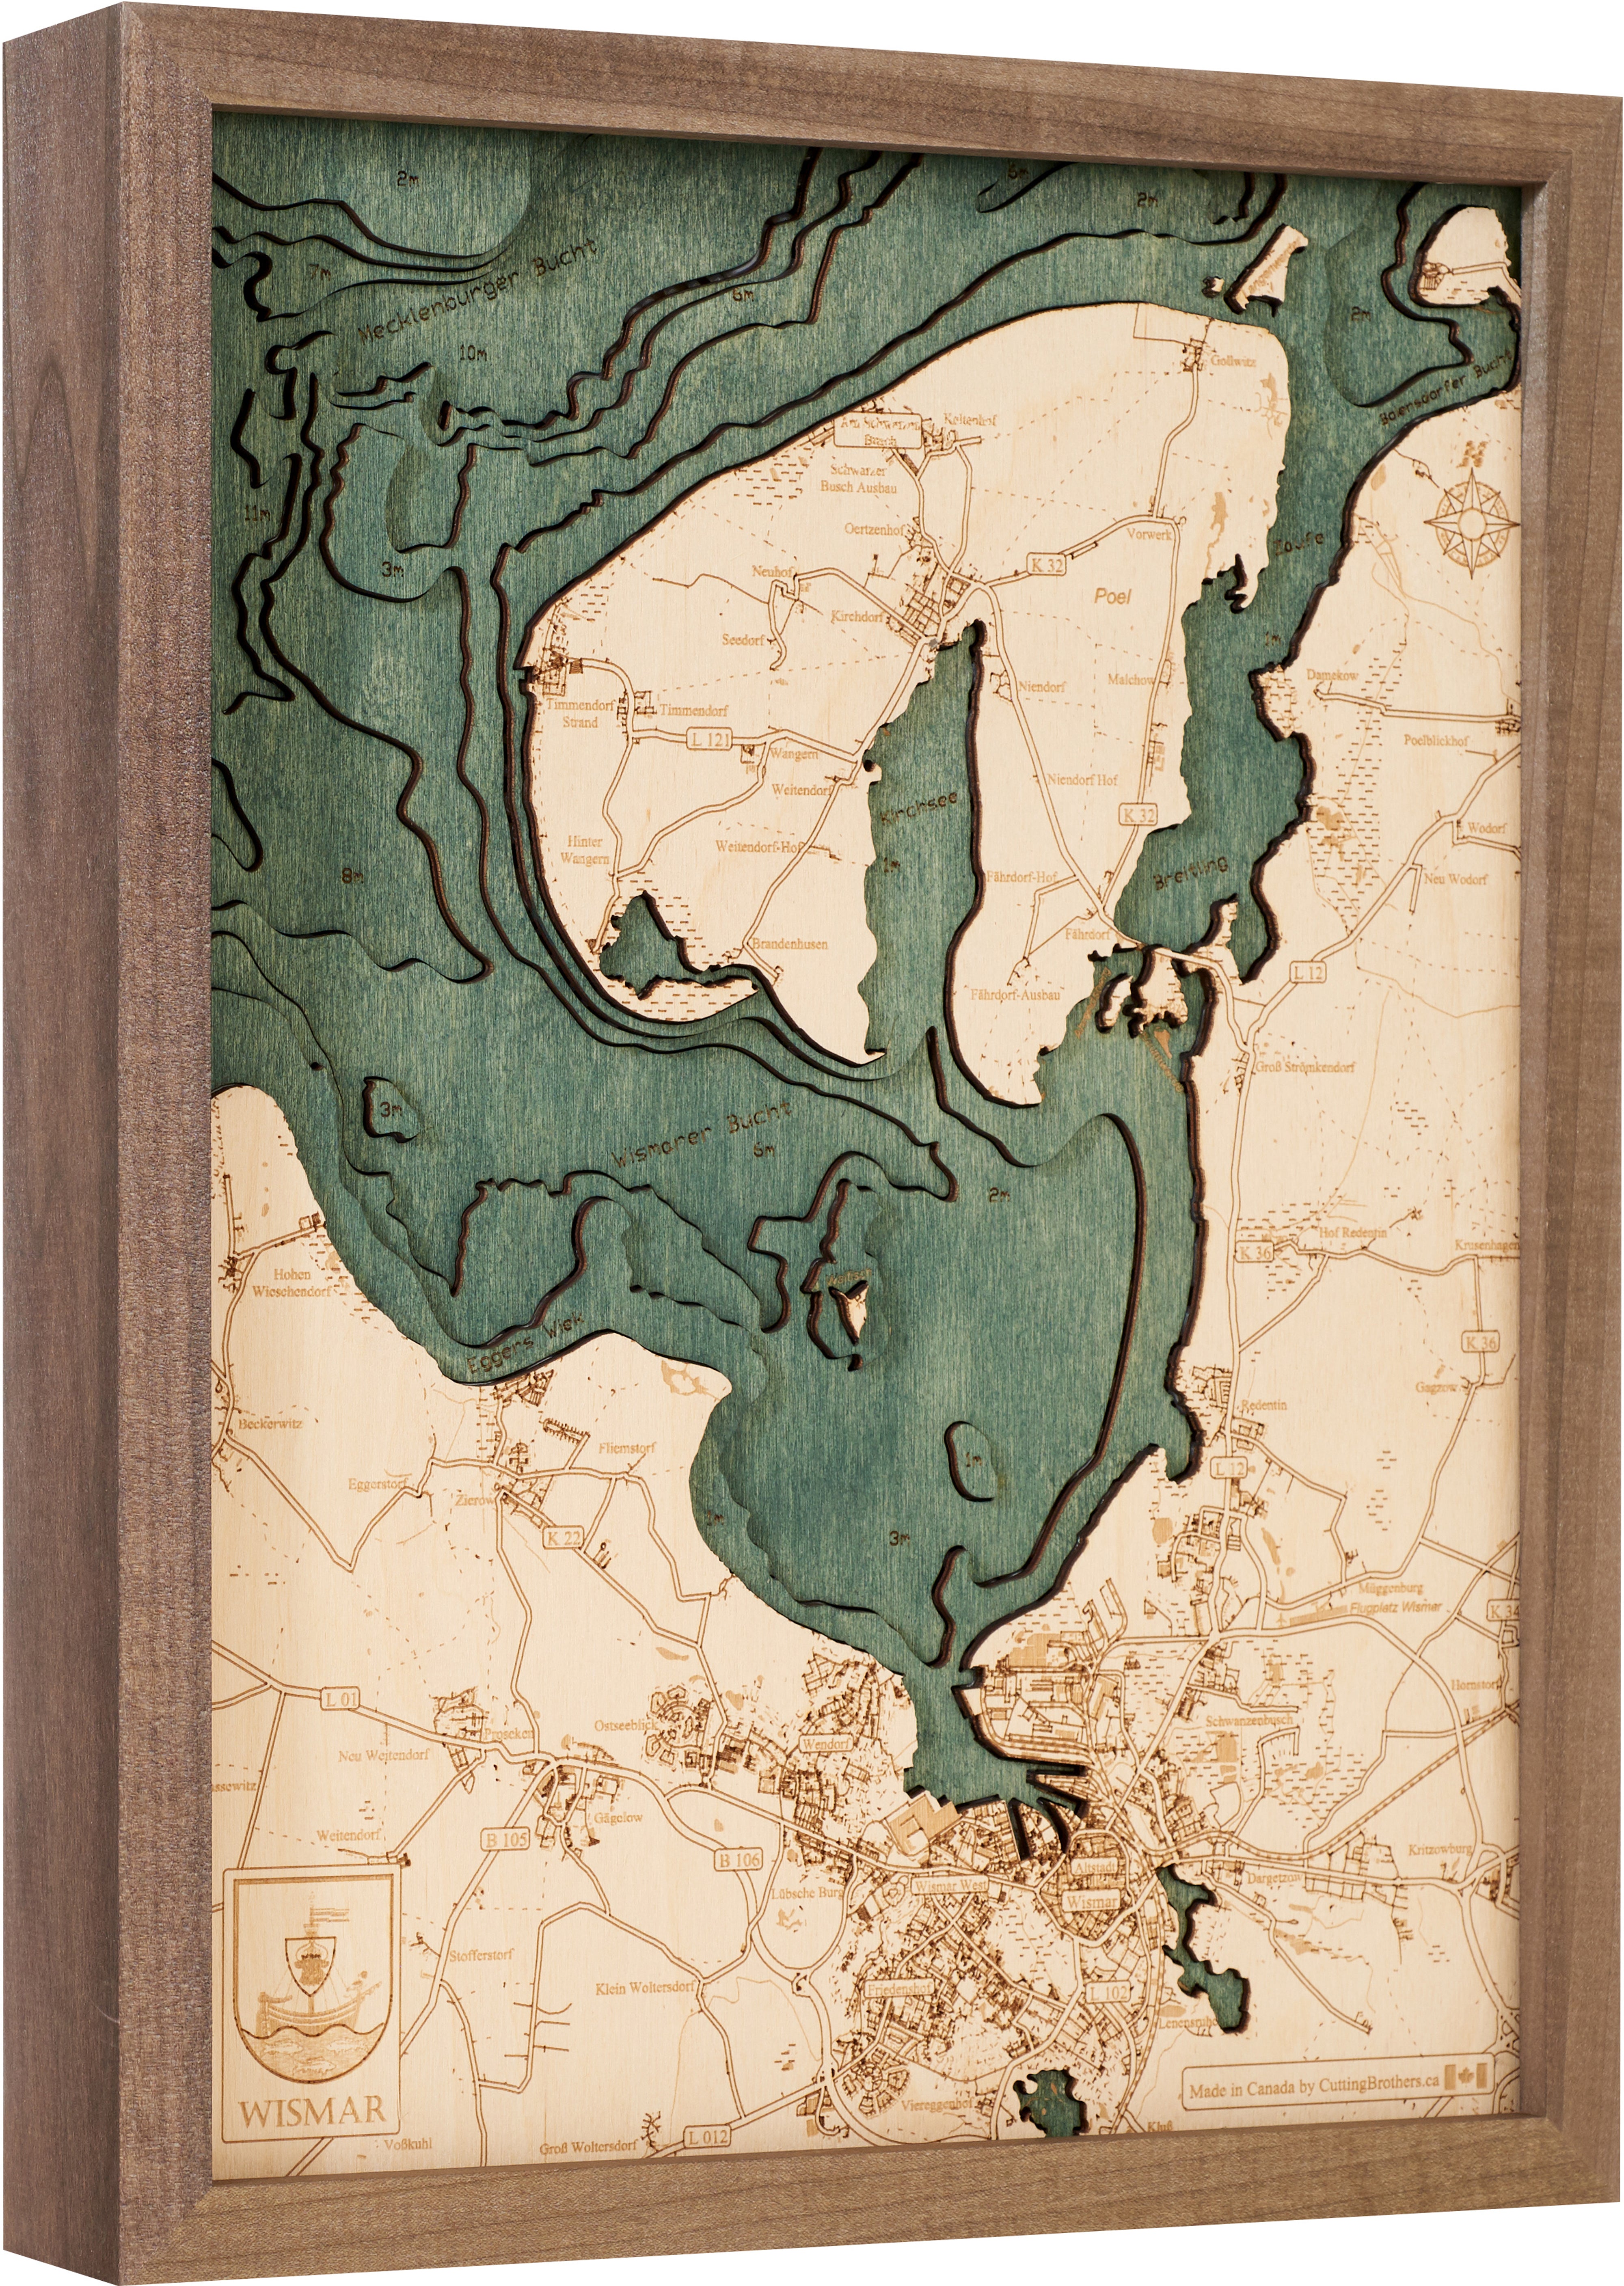 WISMAR and POEL ISLAND 3D wooden wall map - version S